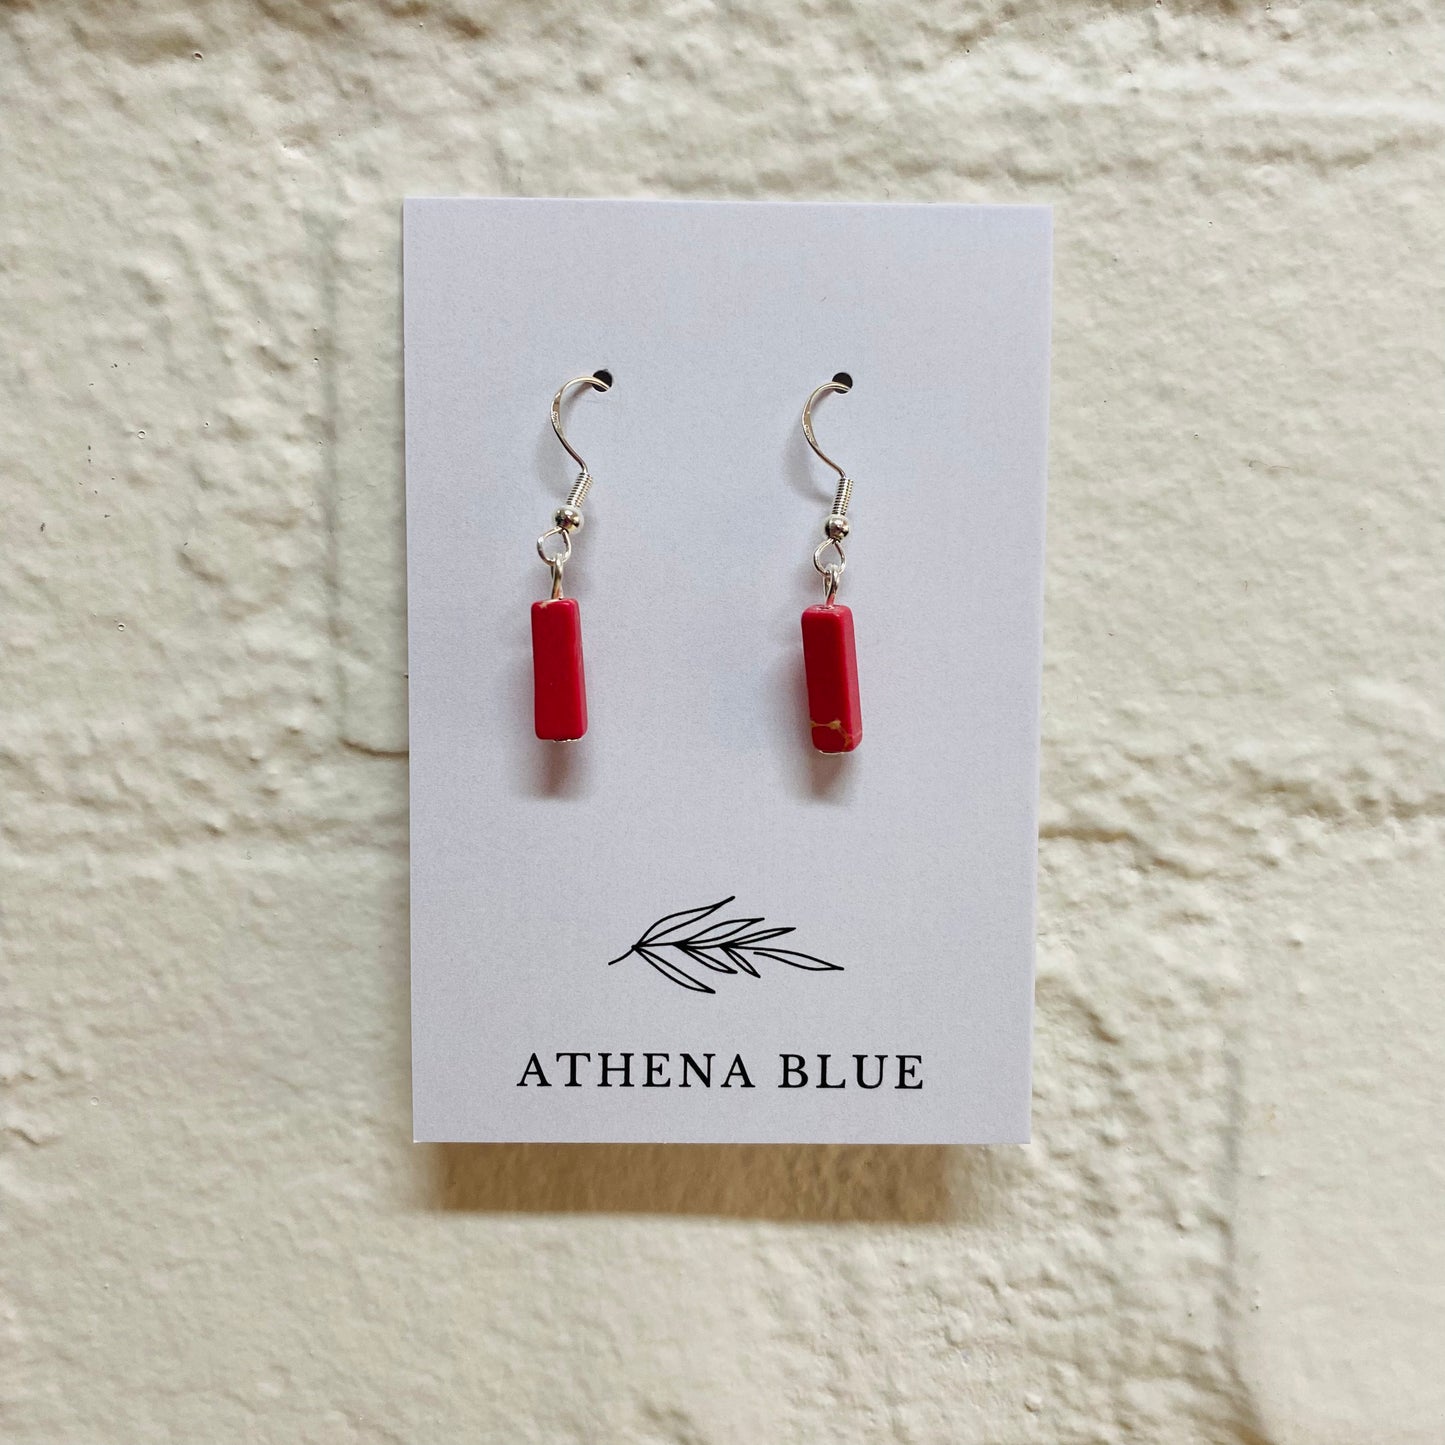 Stone Earrings by Athena Blue